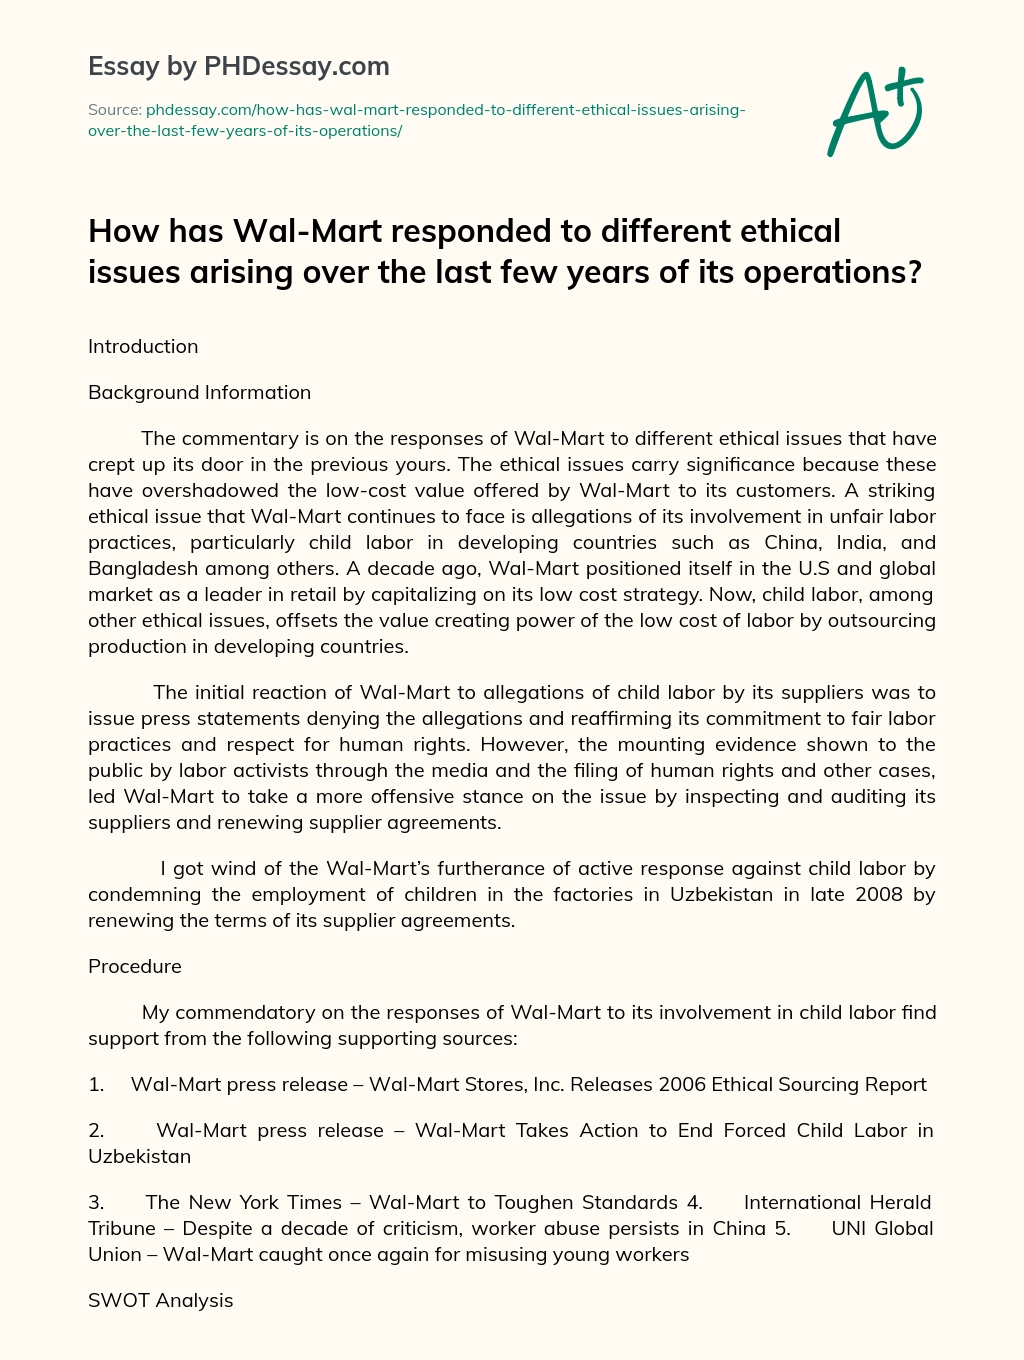 How has Wal-Mart responded to different ethical issues arising over the last few years of its operations? essay